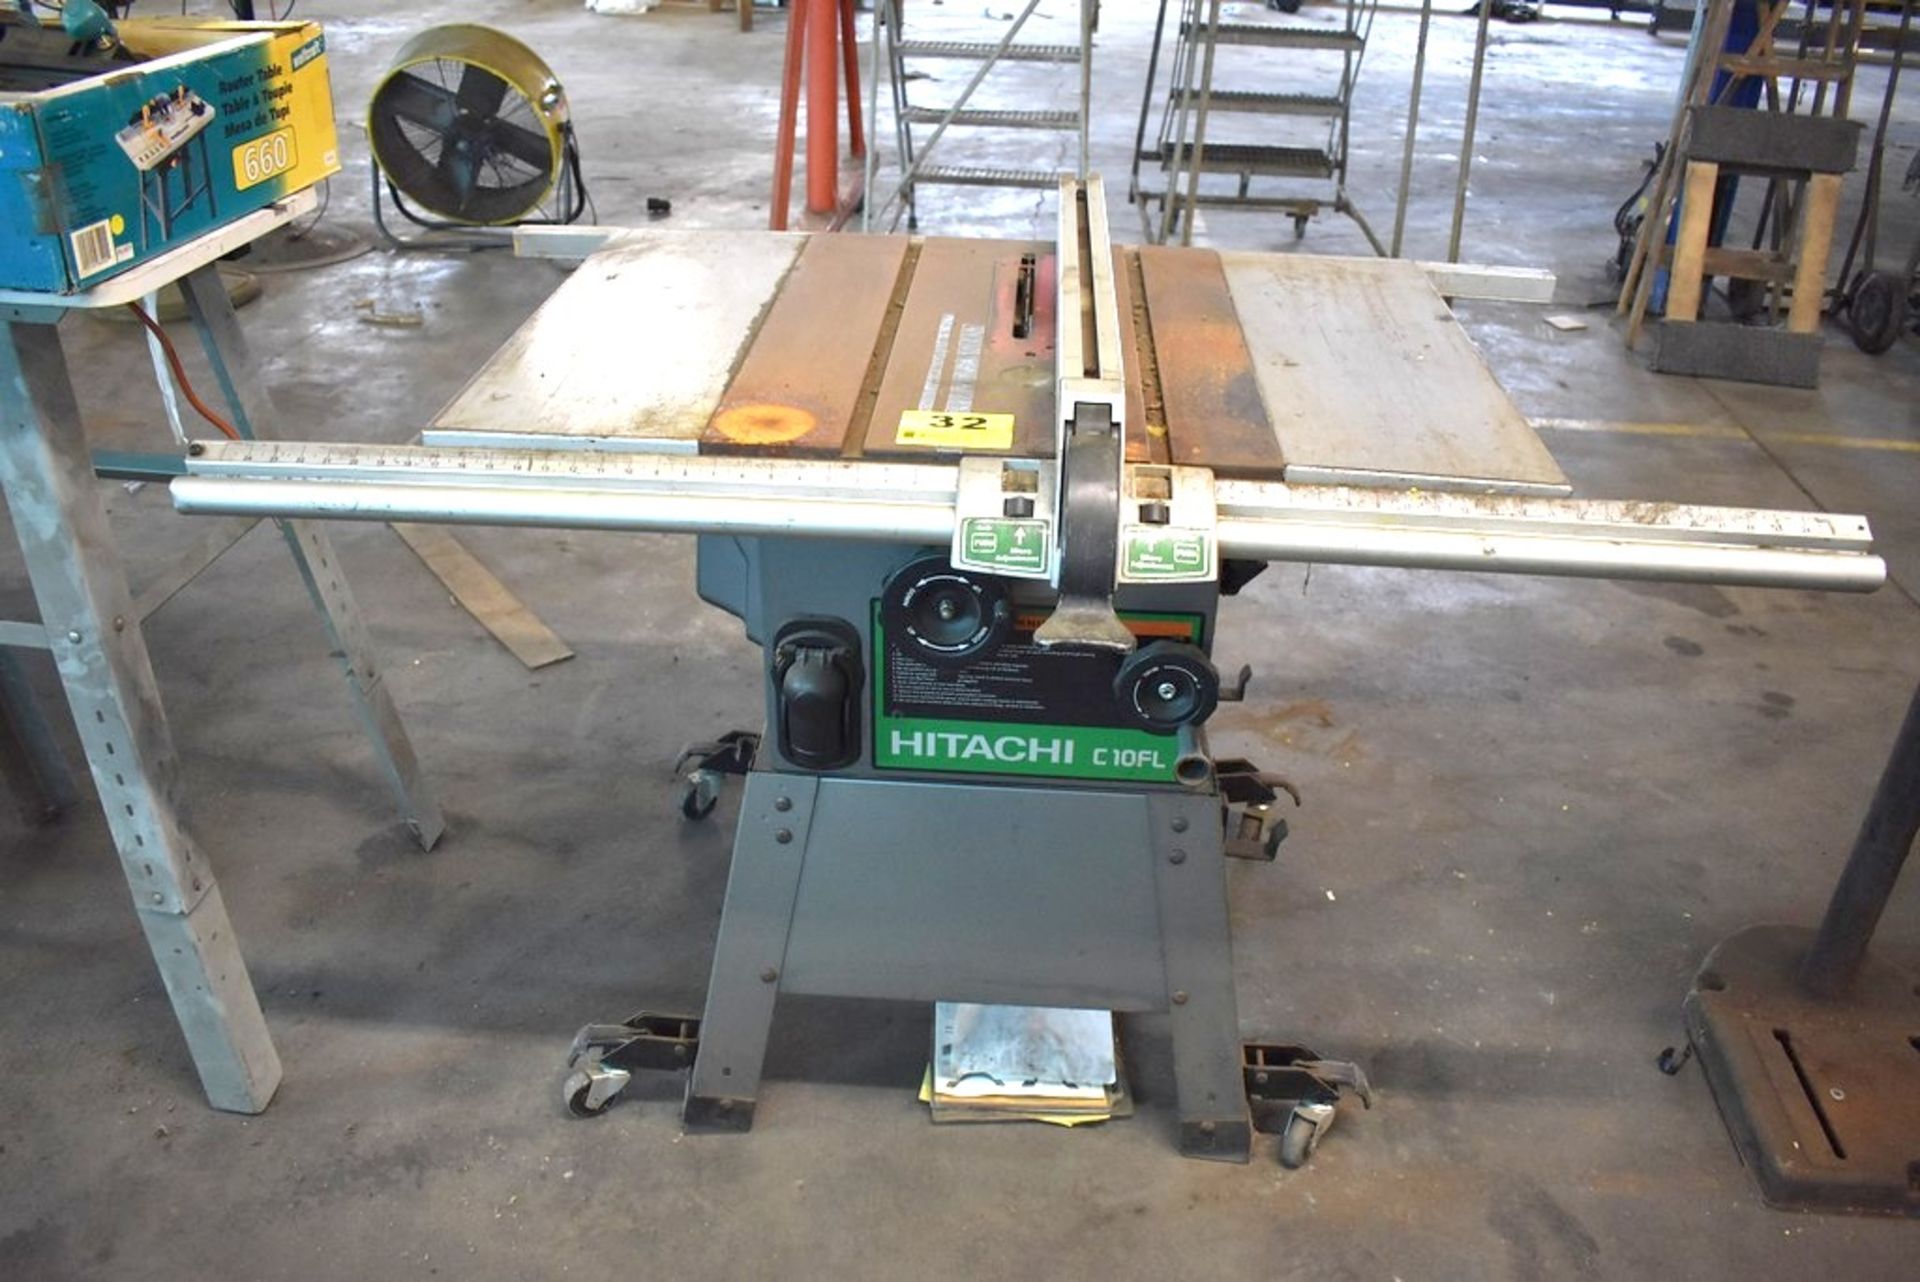 HITACHI C10FL 10" TABLE SAW, MOBILE BASE, TABLE EXTENSIONS, EXTENDED FENCE SYSTEM